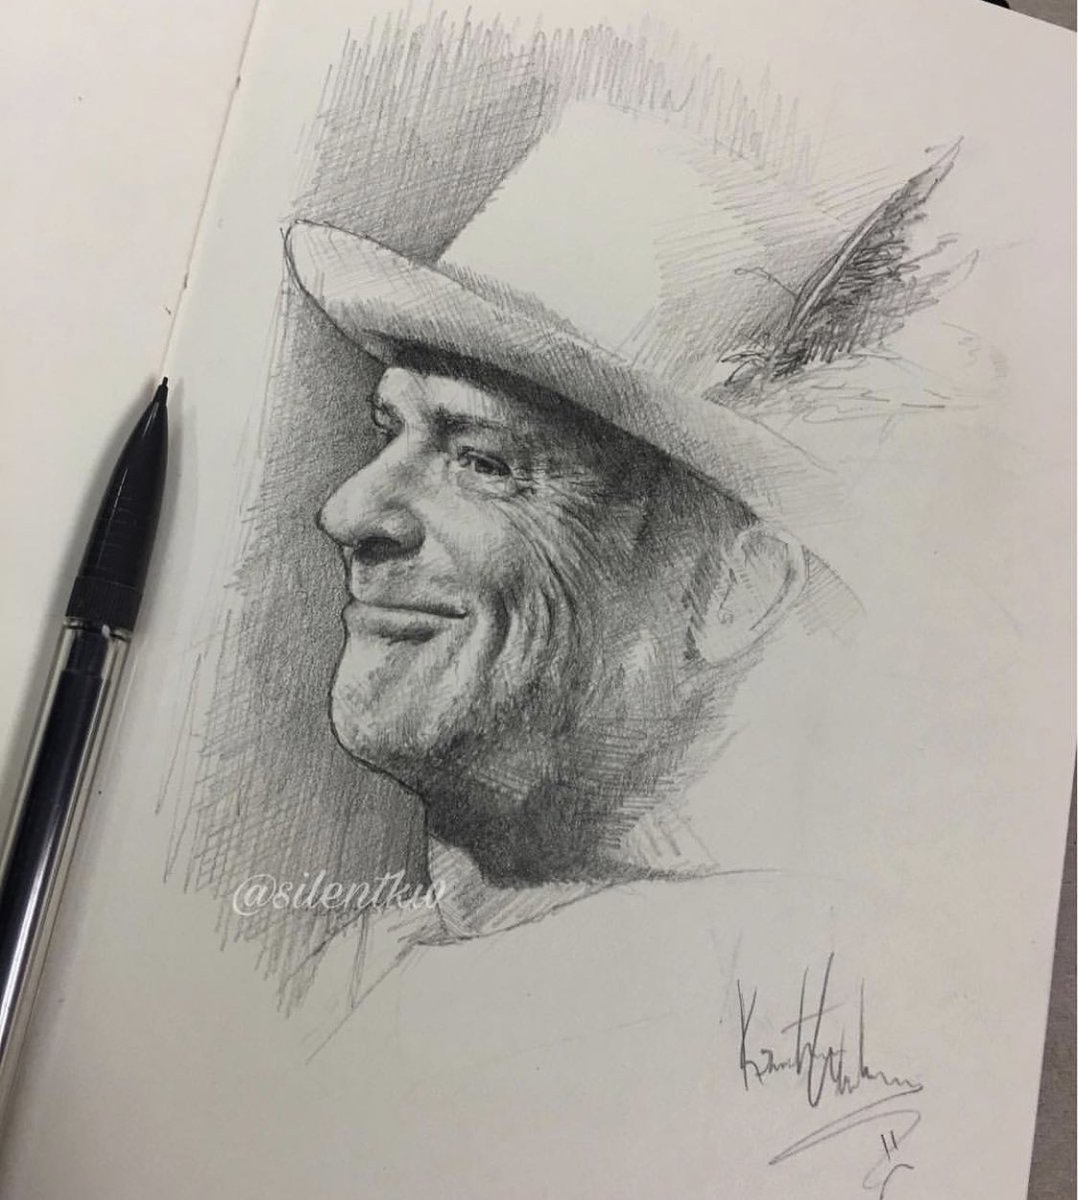 “Man who walks among the stars” ✏️ 

Happy Birthday to the Canadian legend Gord Downie. He would’ve been 59 today. Rip Gord

#gorddownie #thetragicallyhip @thehipofficial #ArtistOnTwitter